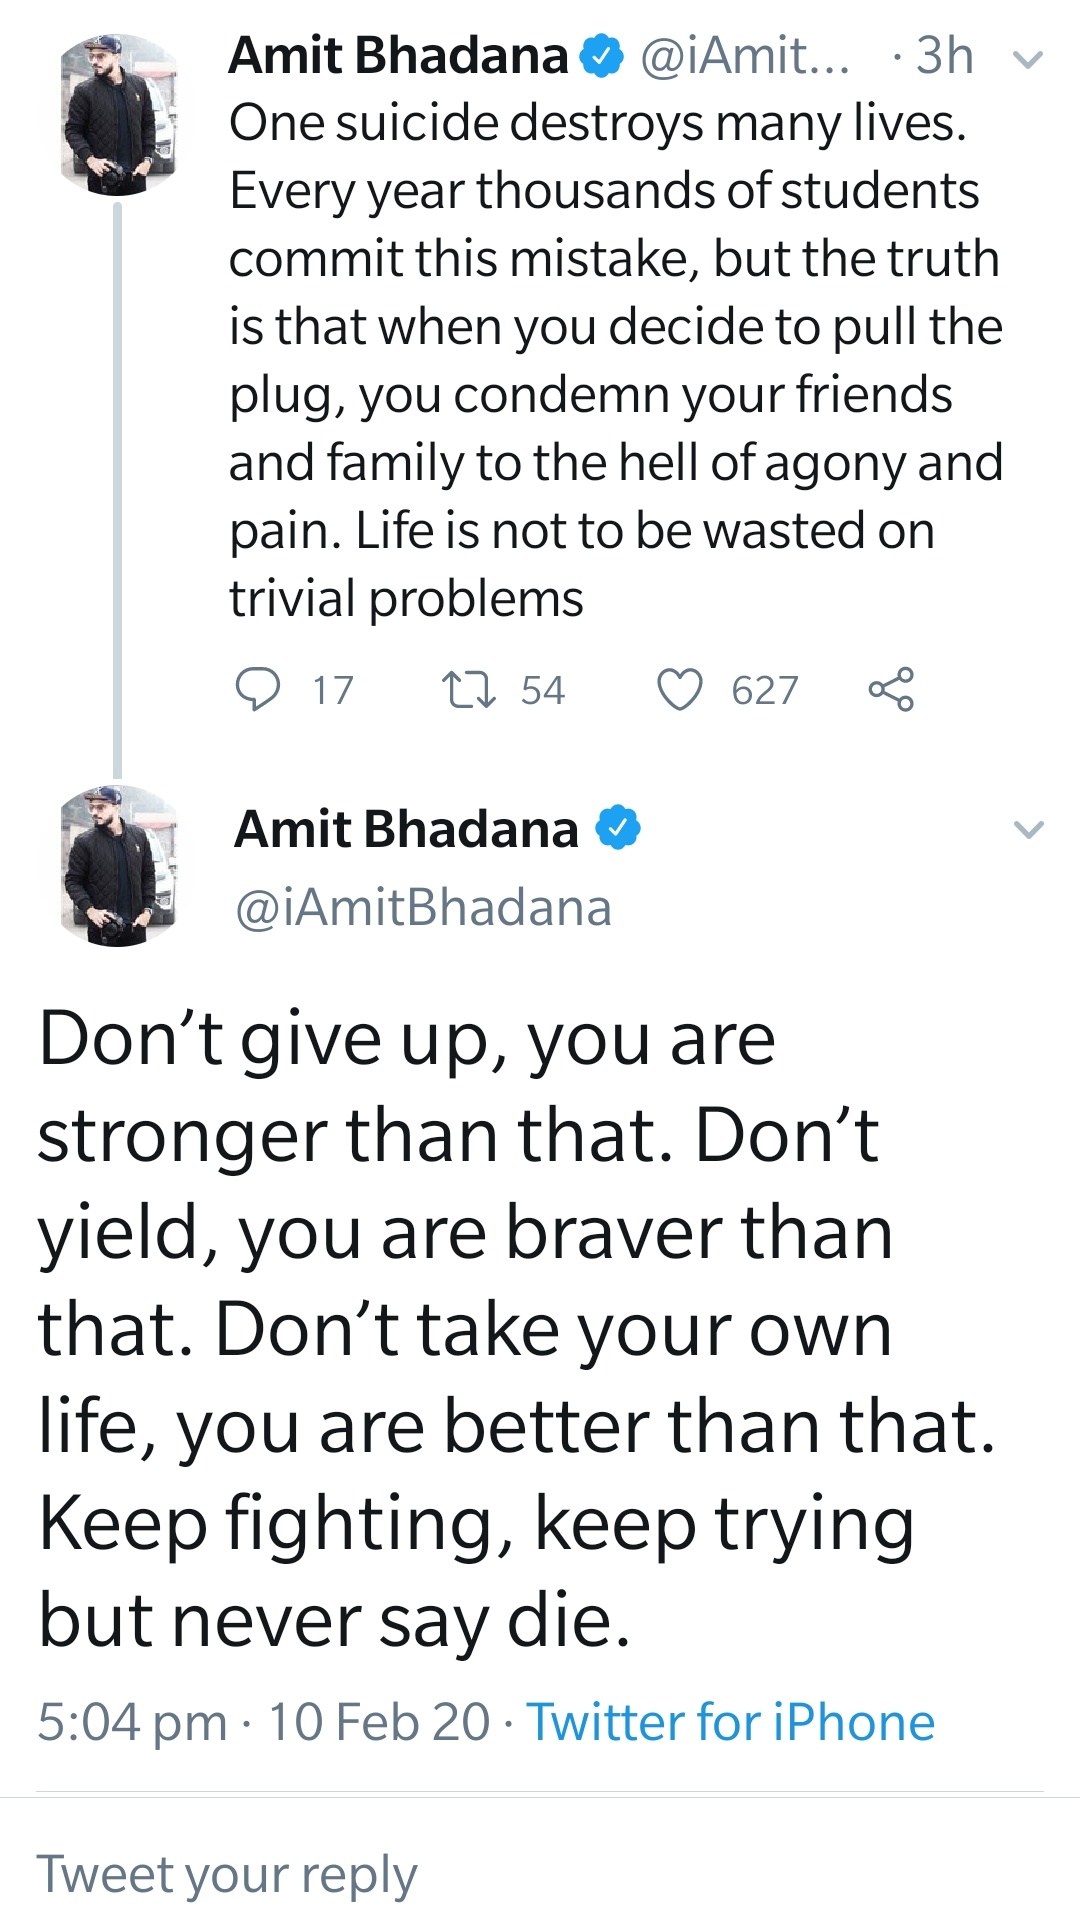 Keep fighting, keep trying but never say die, says Amit Bhadana to people who give up in life 1